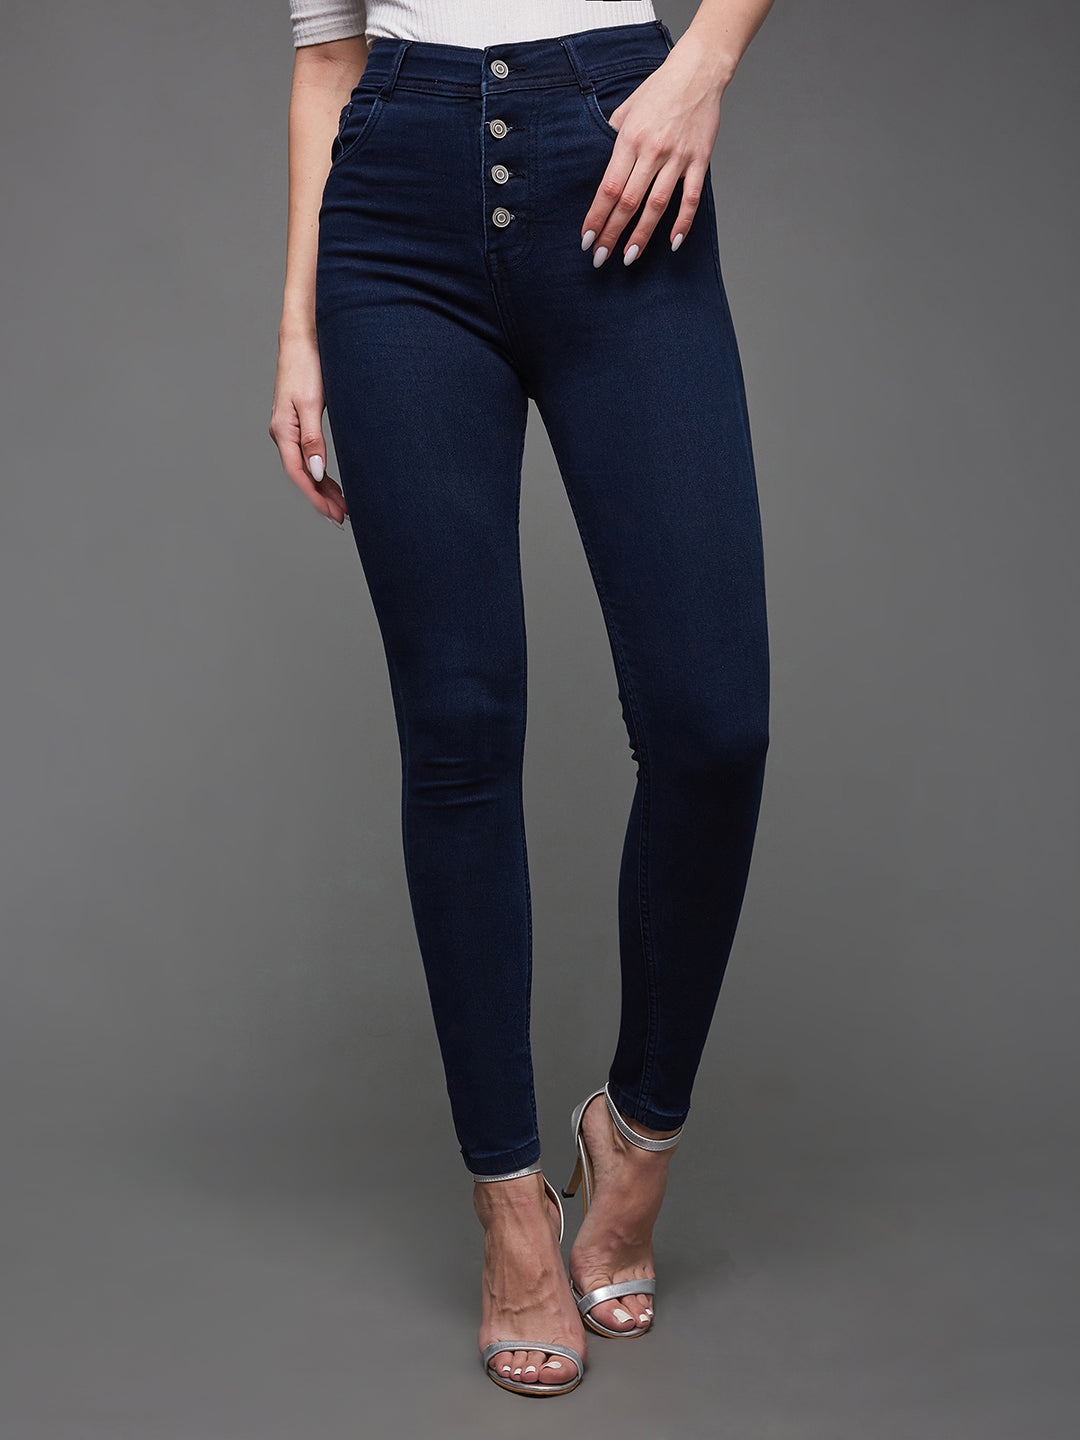 Navy Blue Skinny Fit High Rise Regular Length Clean Look Stretchable Denim Jeans